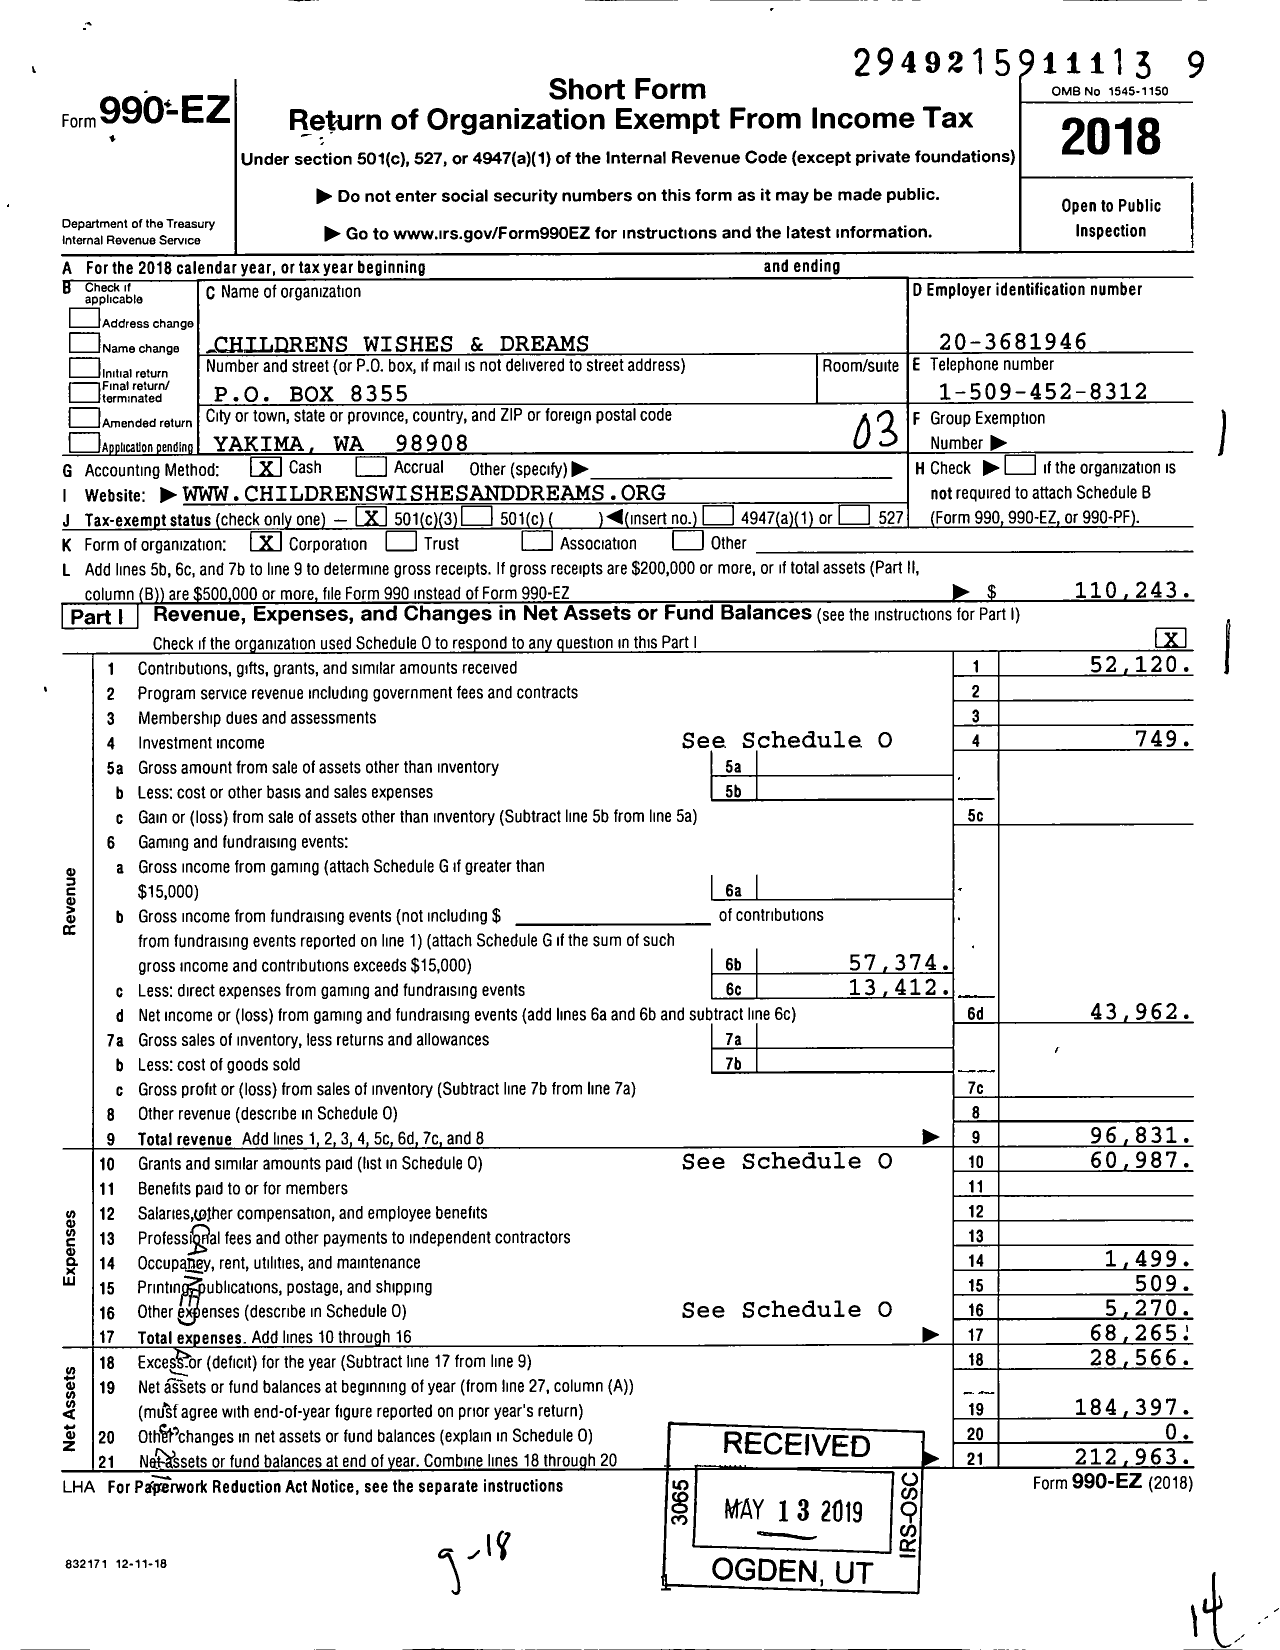 Image of first page of 2018 Form 990EZ for Childrens Wishes & Dreams